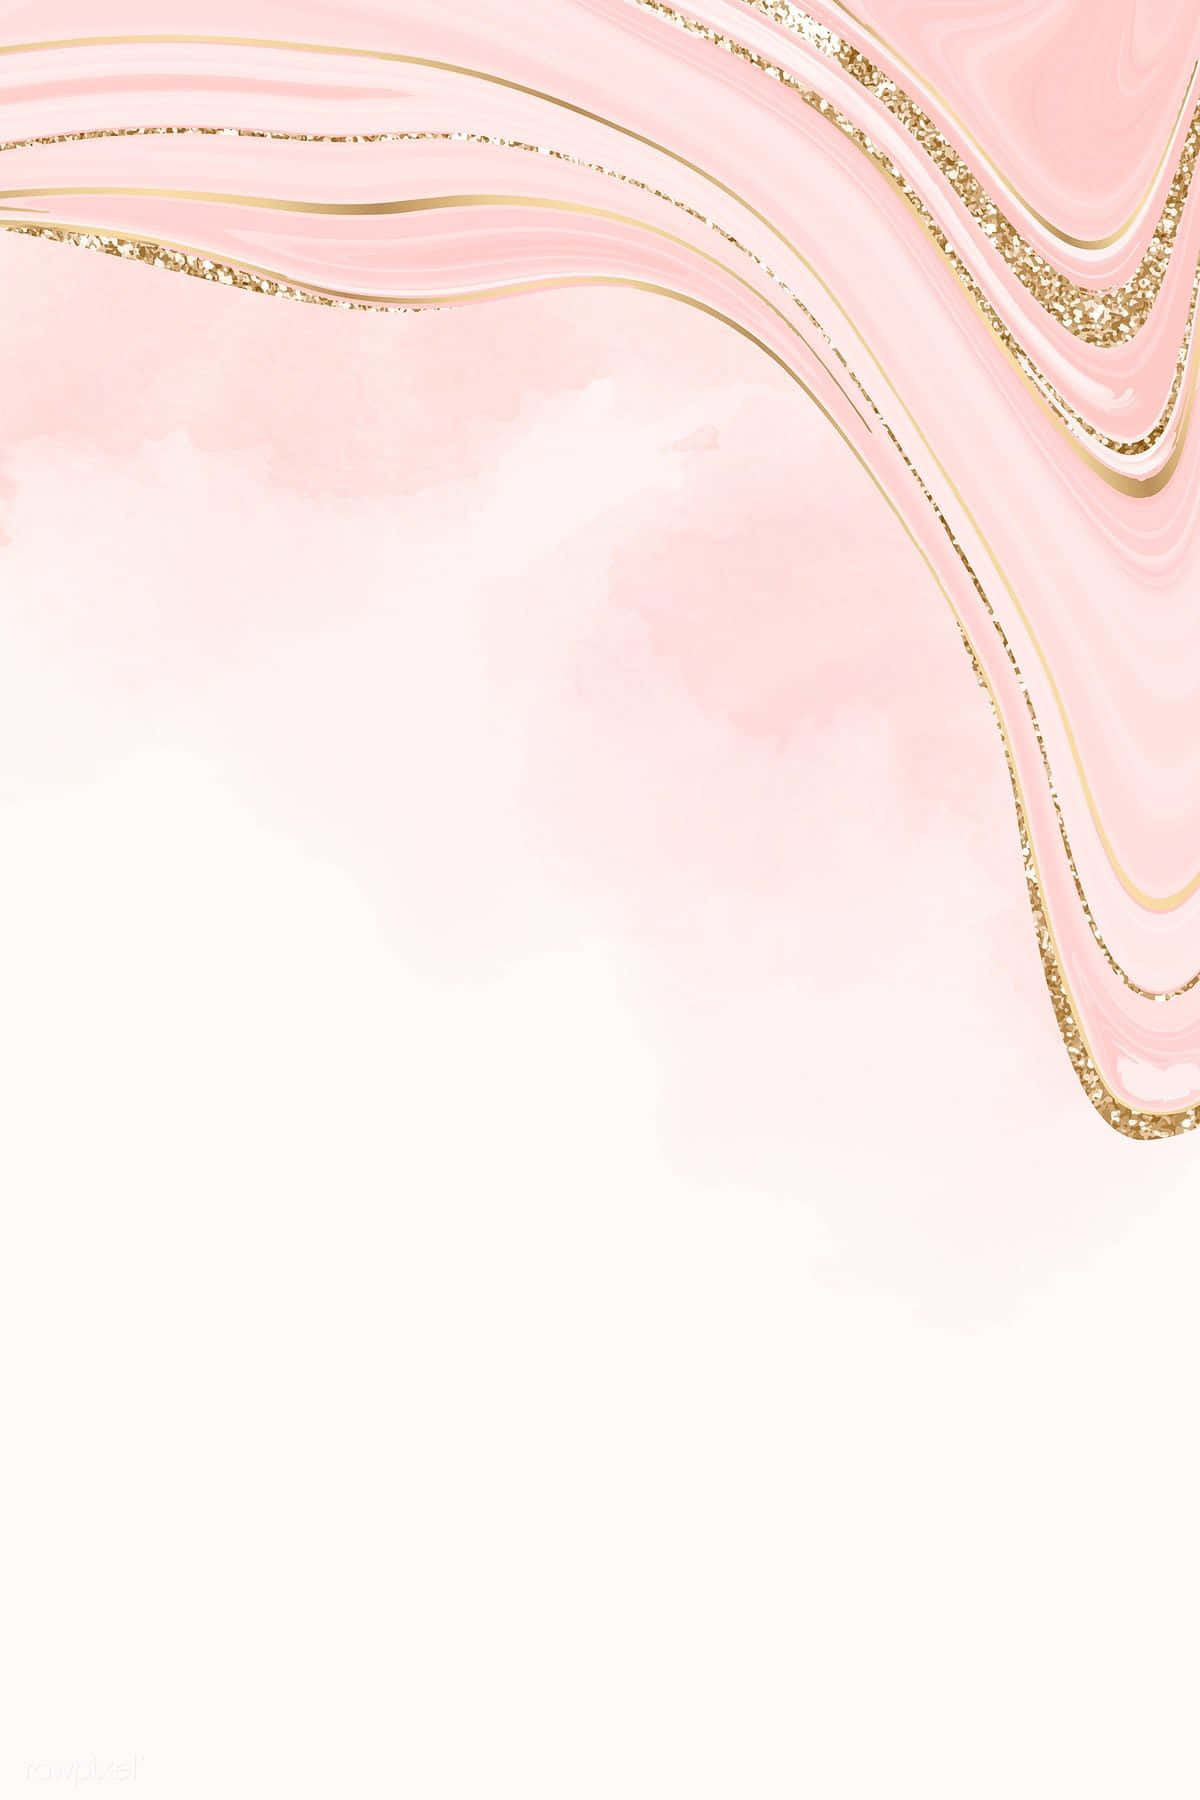 Dare to Dream in Exquisite Pink&Gold Wallpaper